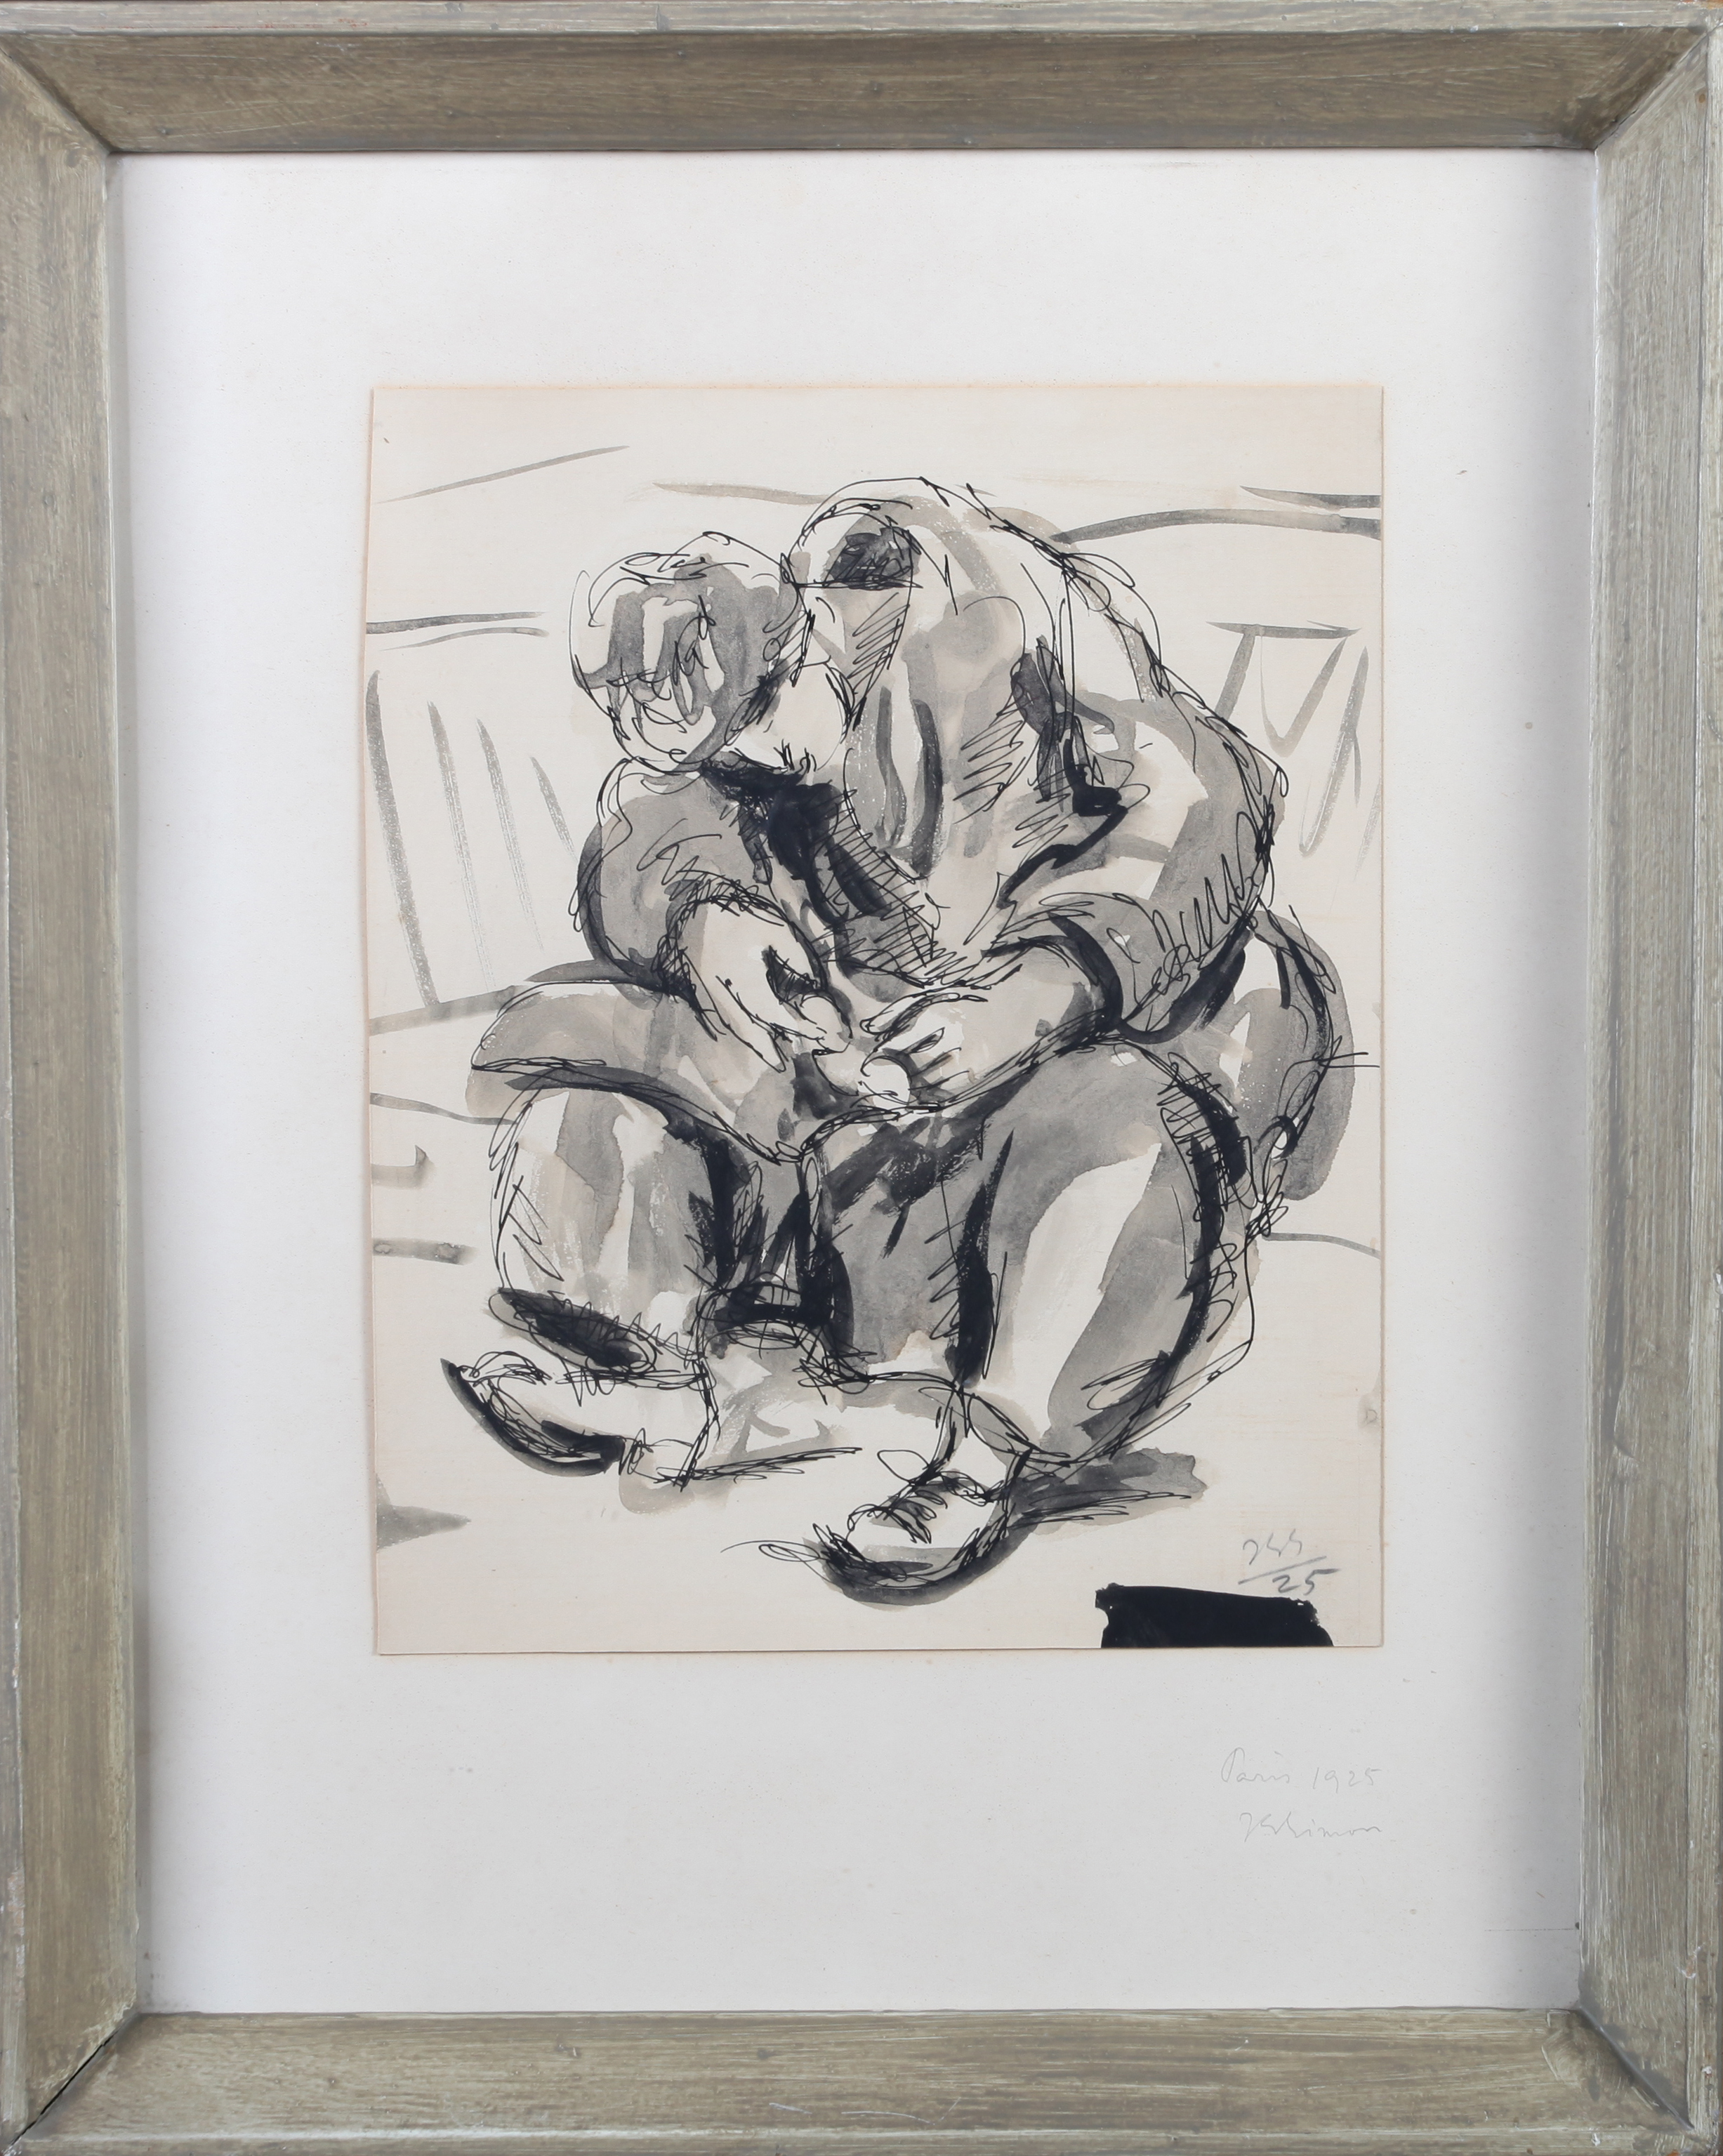 ARR JEAN-GEORGES SIMON (Hungarian 1894-1968) 'Seated Man' portrait, ink and wash, initialled and - Image 5 of 5